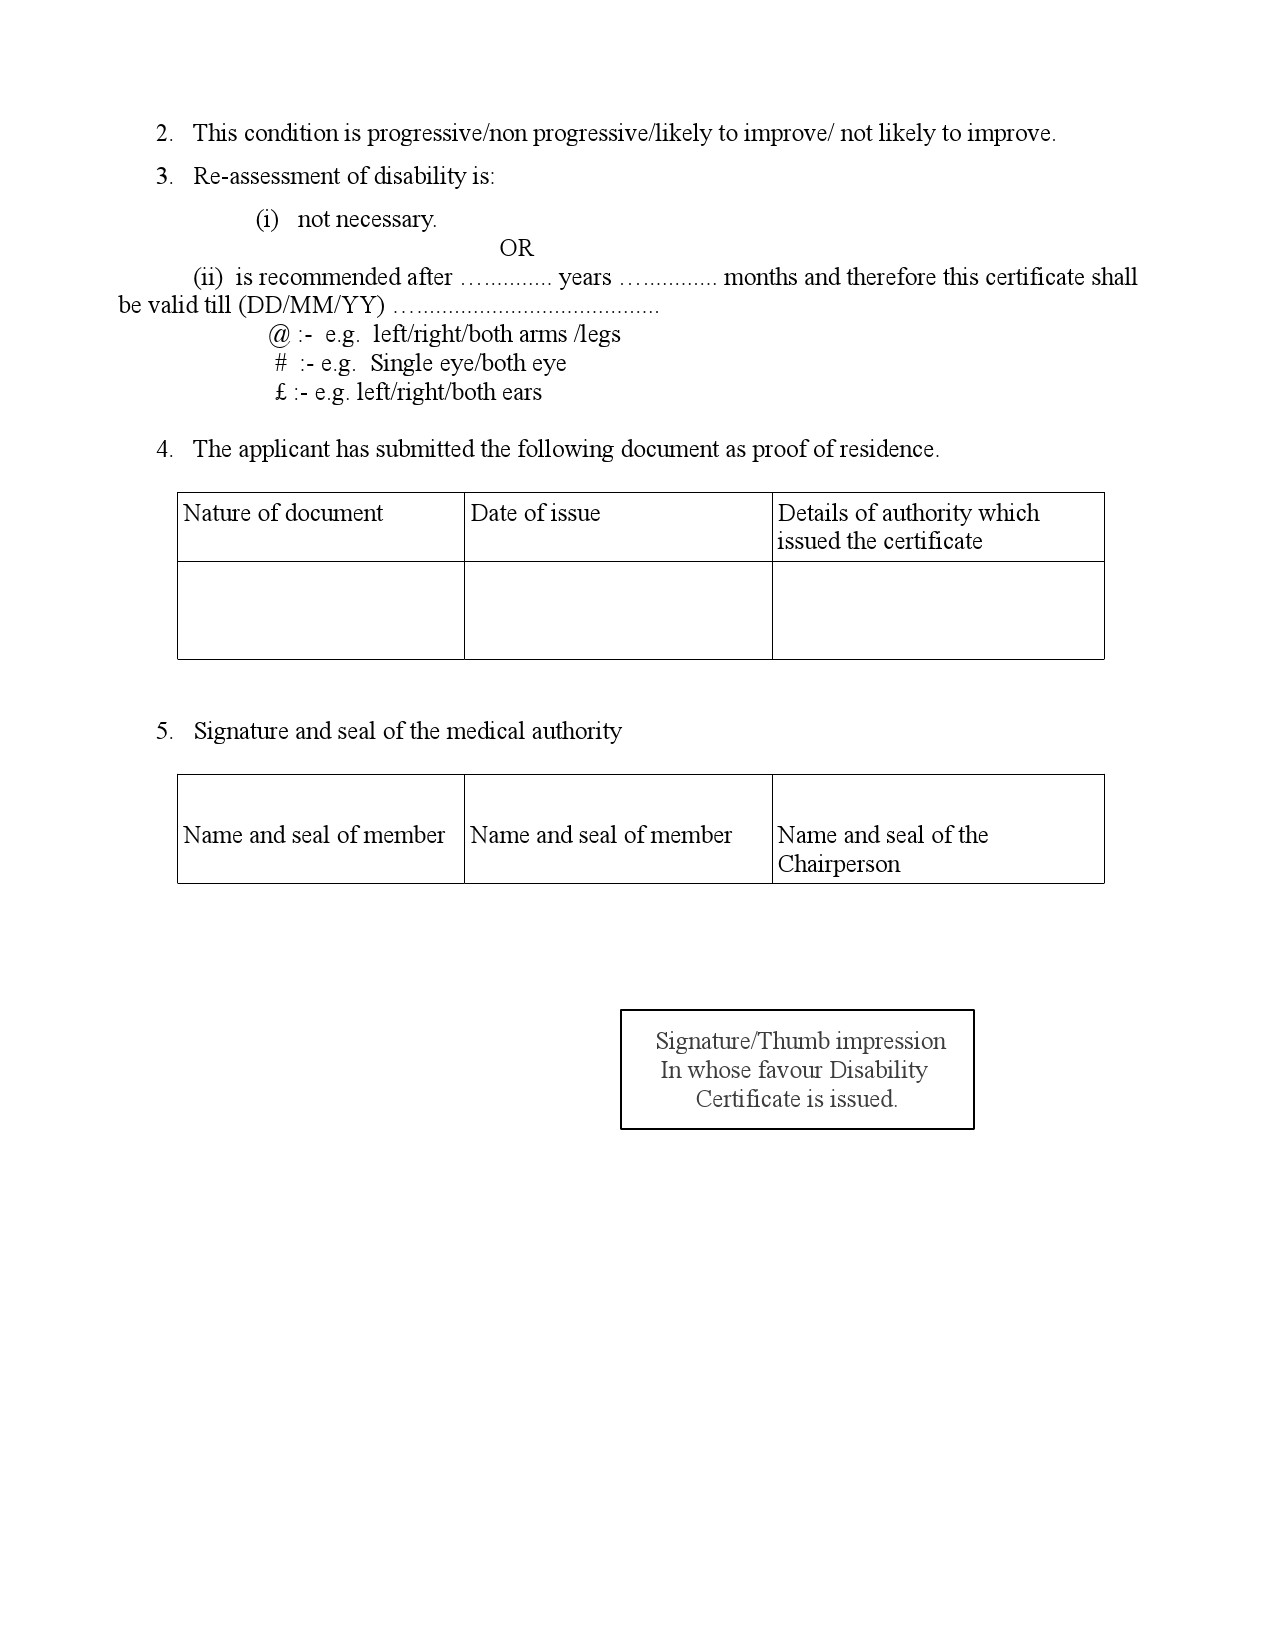 General Conditions and Certificate Formats in English - Notification Image 6